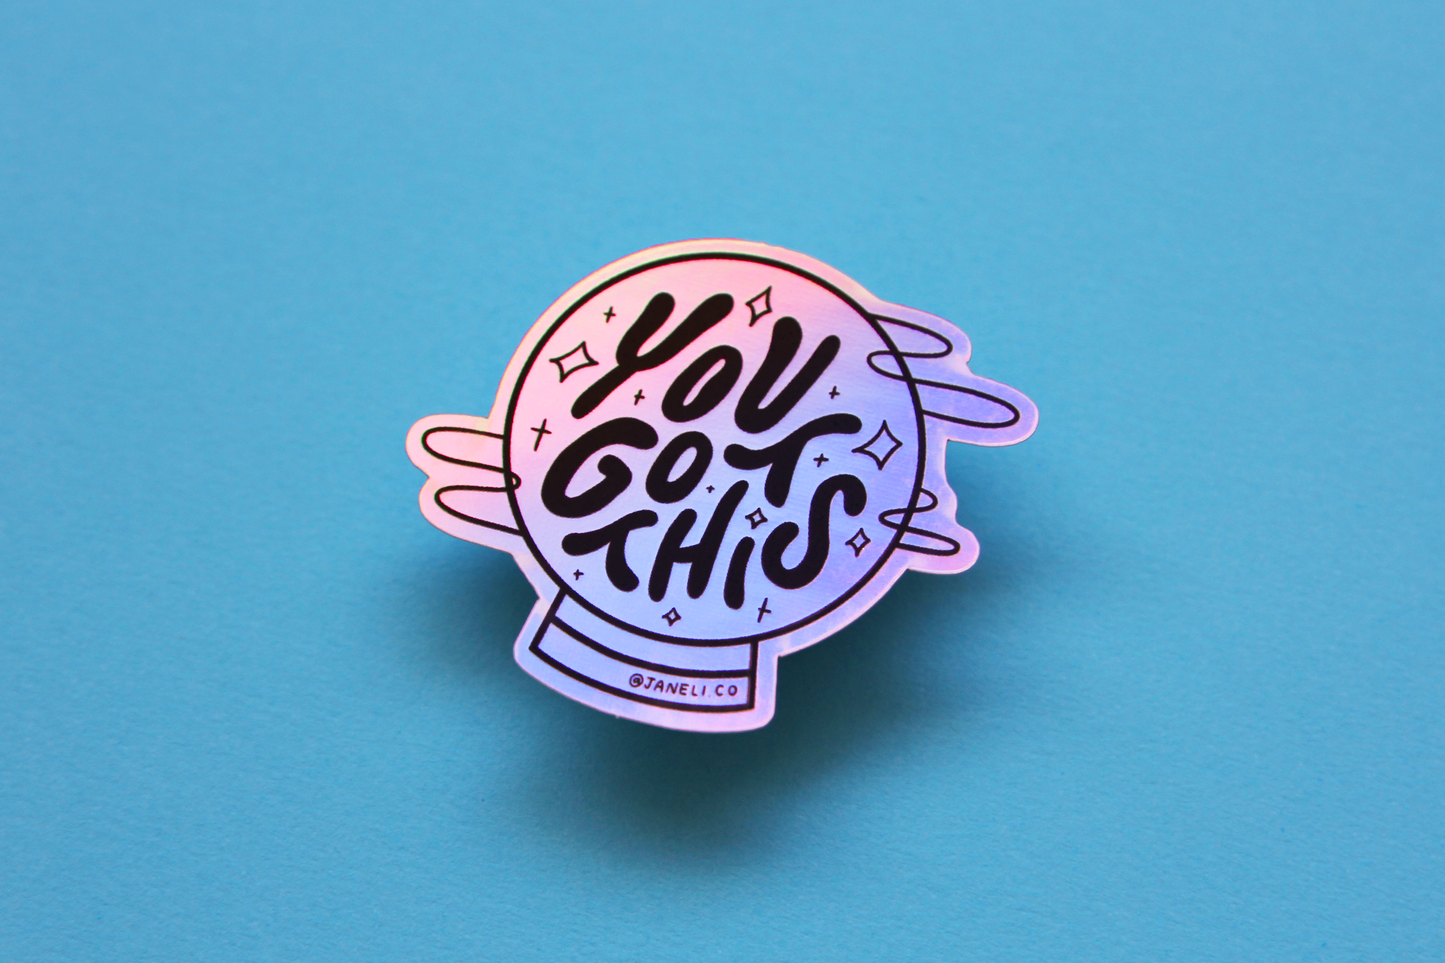 A holographic JaneLi.Co sticker that says "You Got This" in a magic crystal ball over a blue background. 